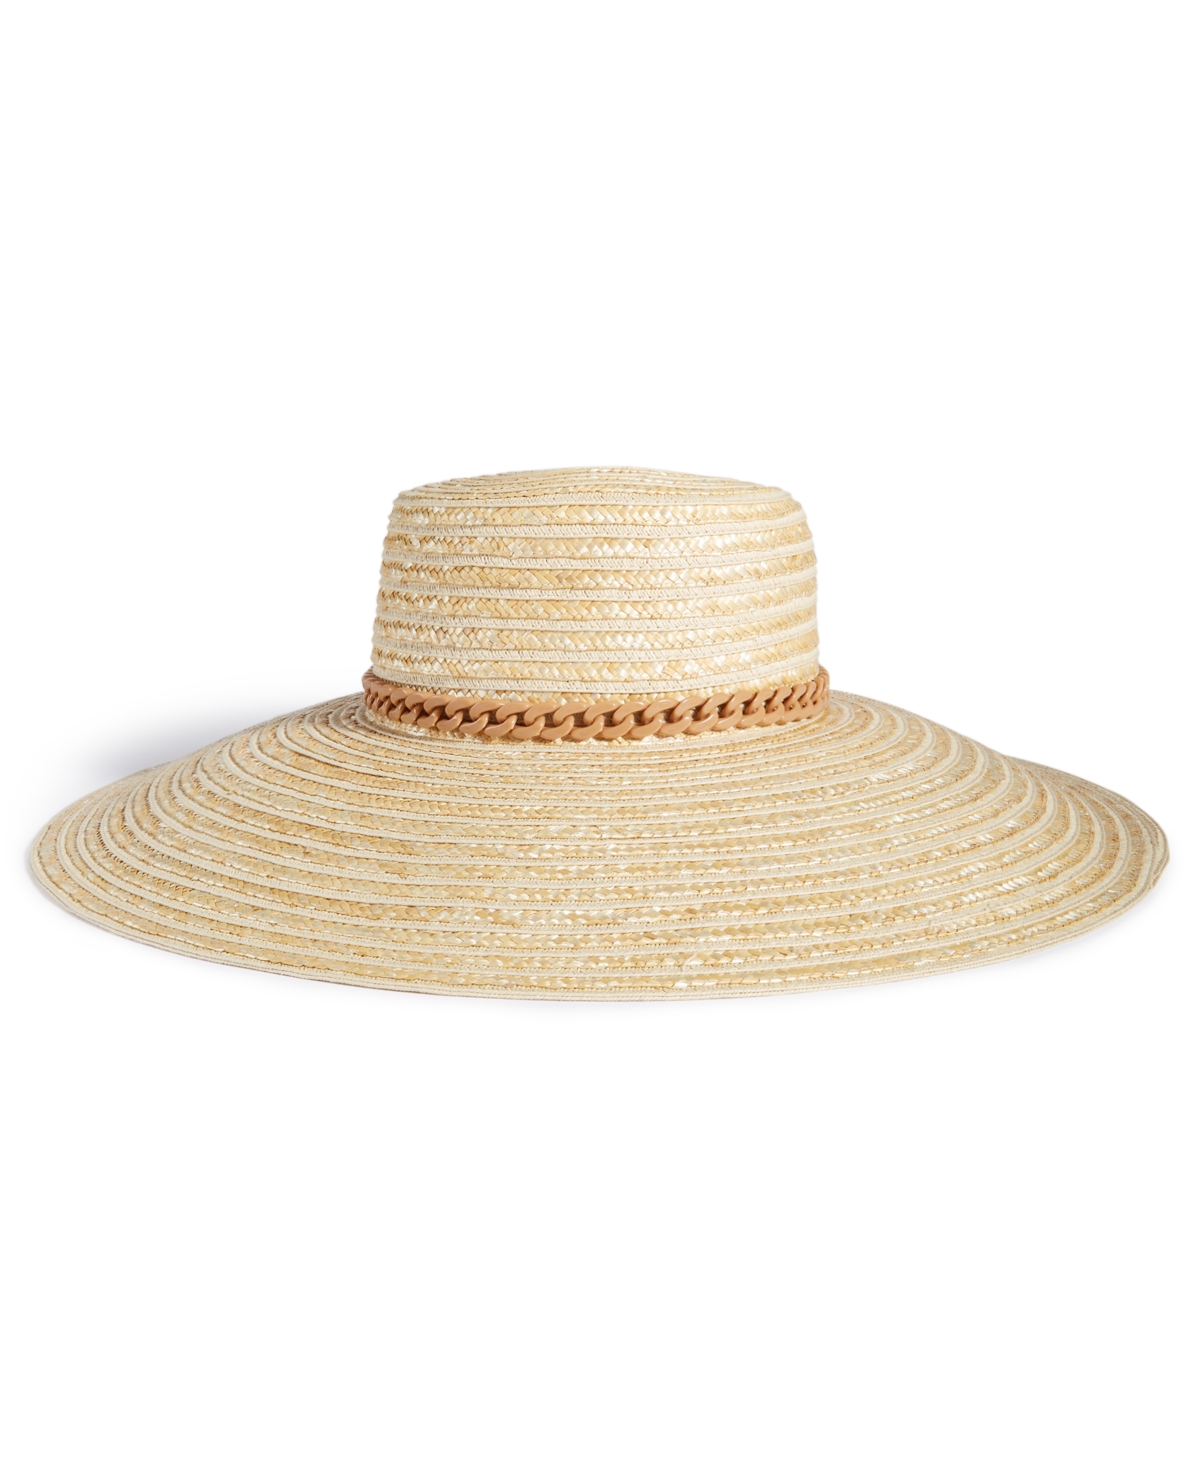 Flower Show Straw Braid Downbrim Hat, Created for Macy's - Natural